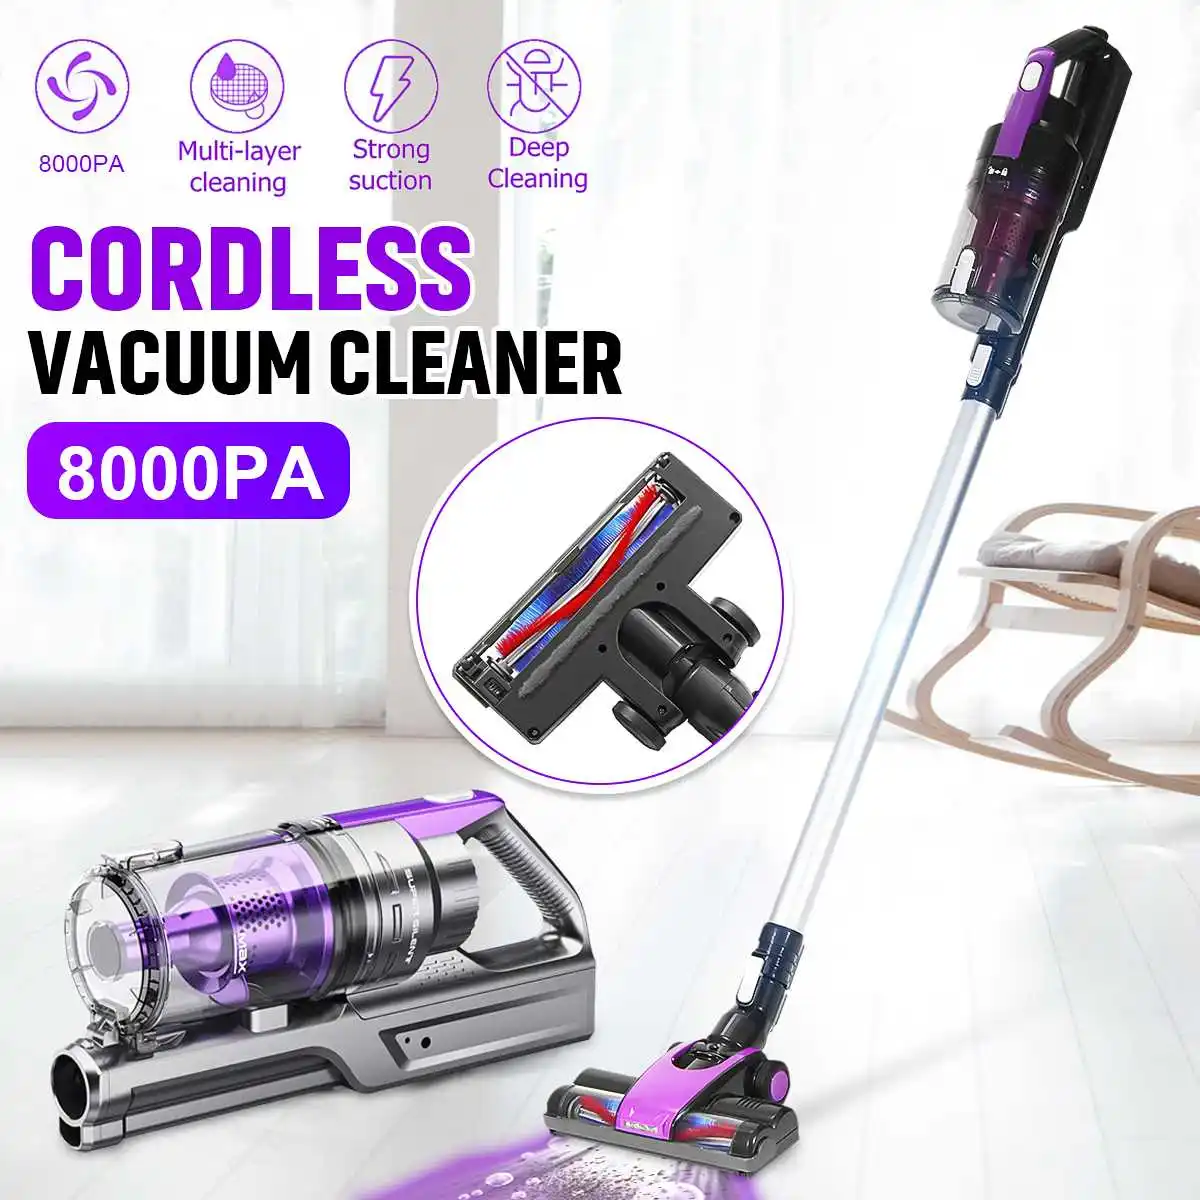 

120W Protable 2 In 1 Handheld Wireless Vacuum Cleaner 8000Pa Cyclone Filter Strong Suction Dust Collector Motorized Brush